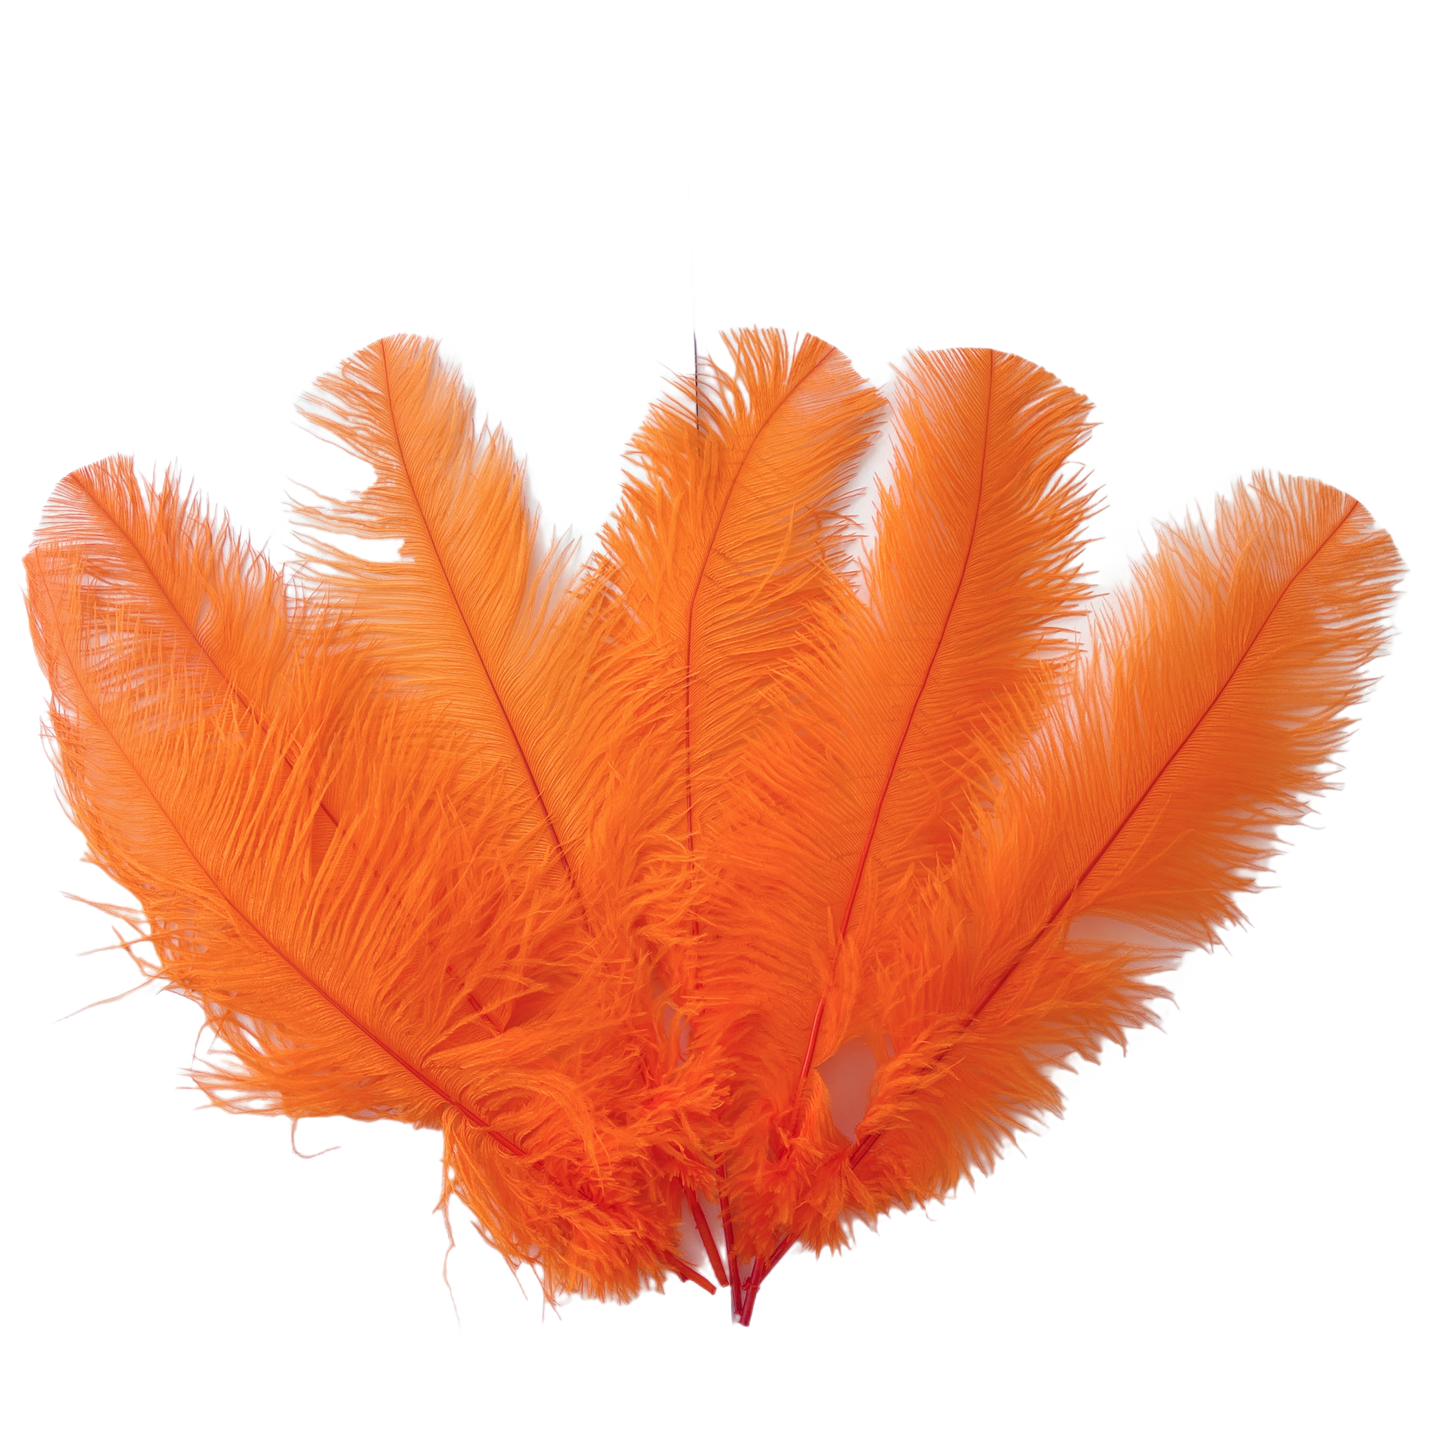 Ostrich Feather Spad Plumes 16-20" (Orange) - Buy Ostrich Feathers